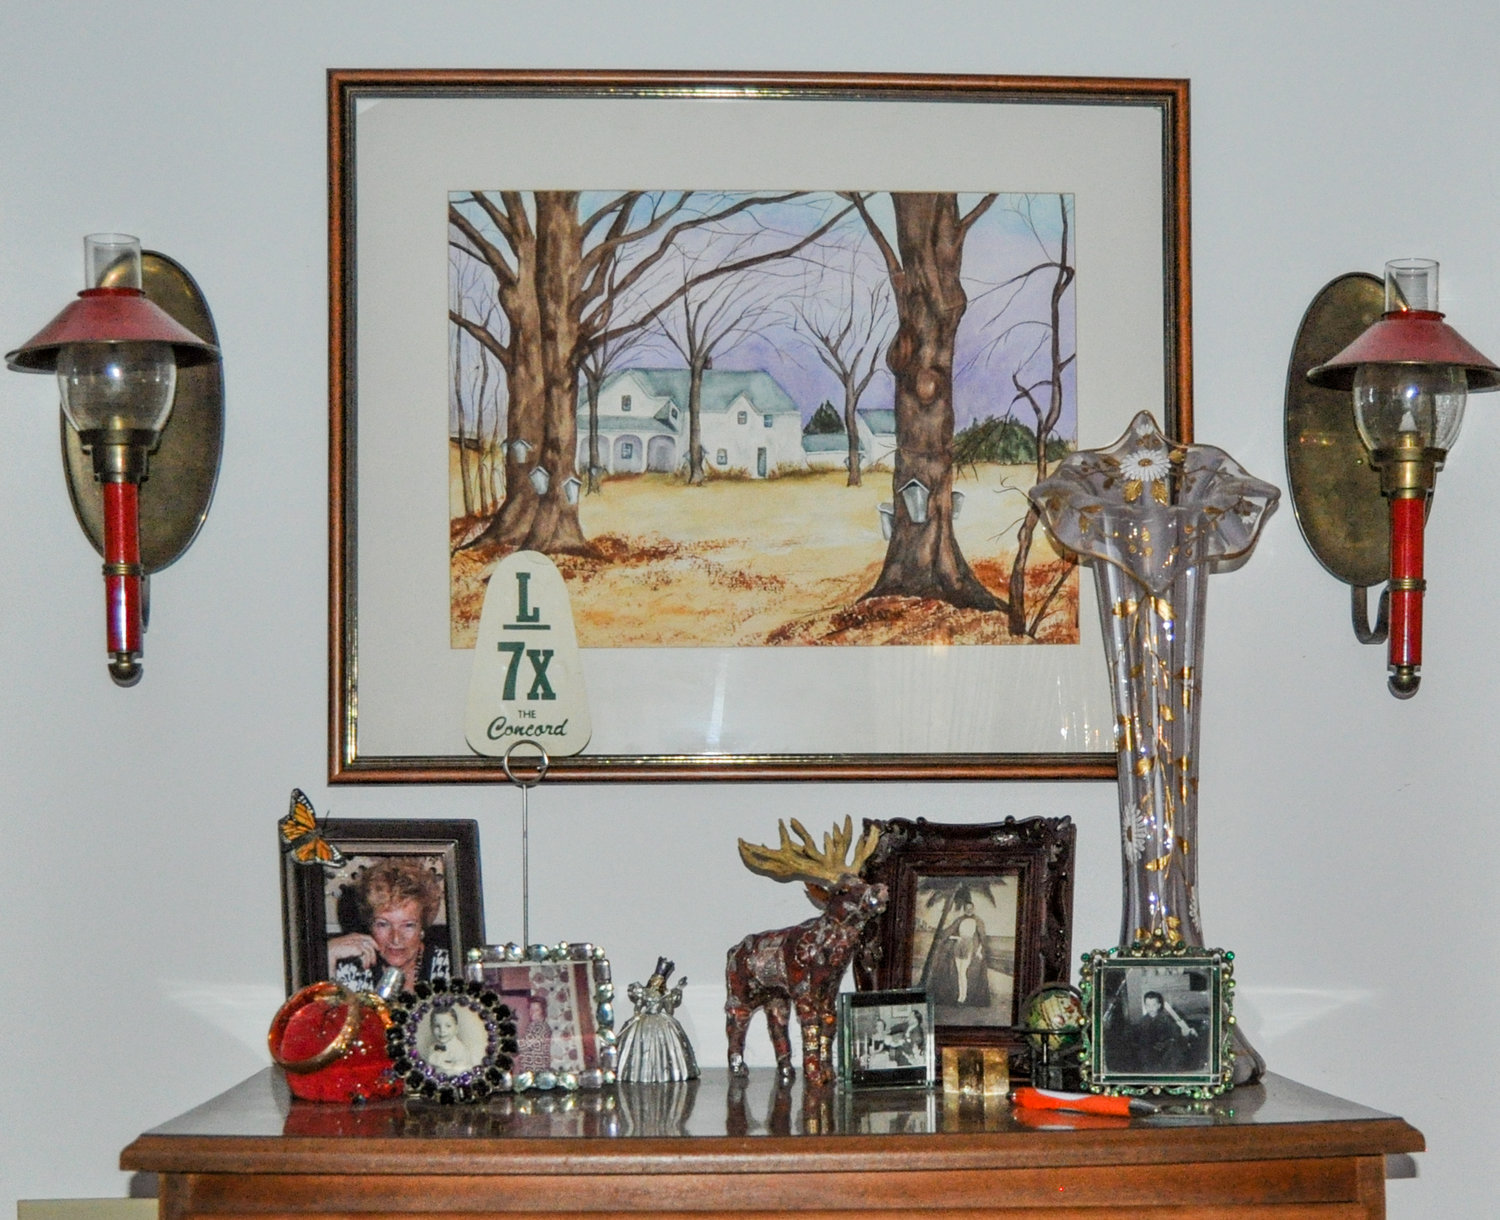 The watercolor painting above the highboy in my bedroom was painted by my incredibly talented mother who's pictured here in the lower left, just opposite of her father who is sporting a grass skirt (another story) in an antique frame opposite mom. Hurricane lamps, a sequined moose and a Venetian glass vase from the 1930s complete the desired effect. Funky. Eclectic. Chic. IMHO.